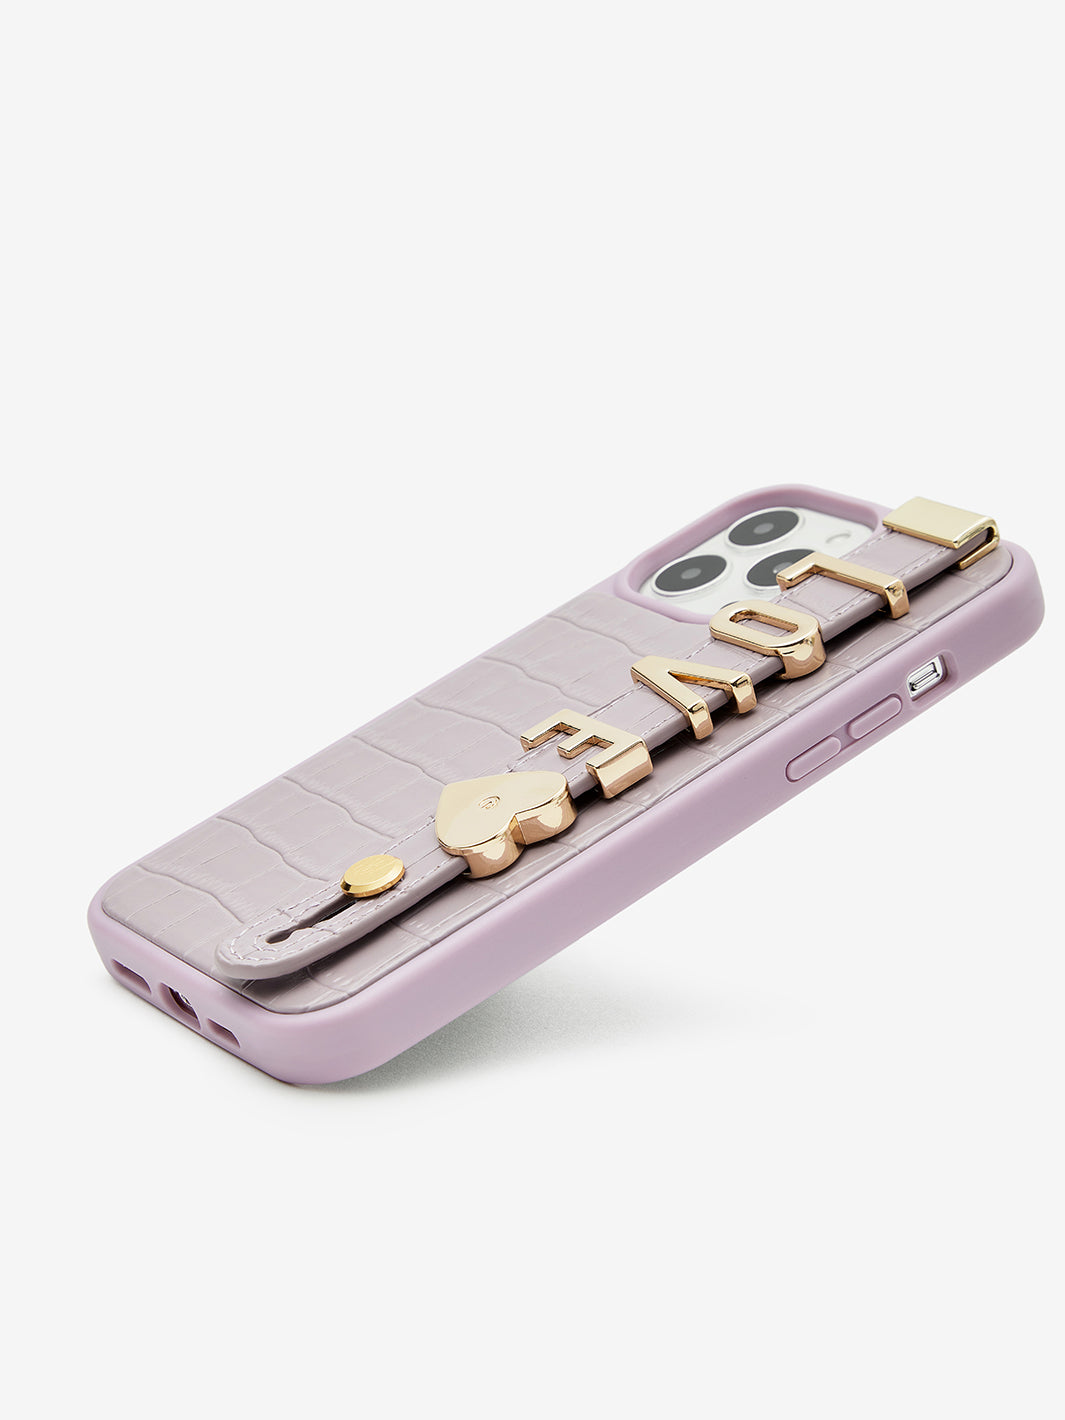 Personal Touch- Customized Alphabet Phone Case-purple